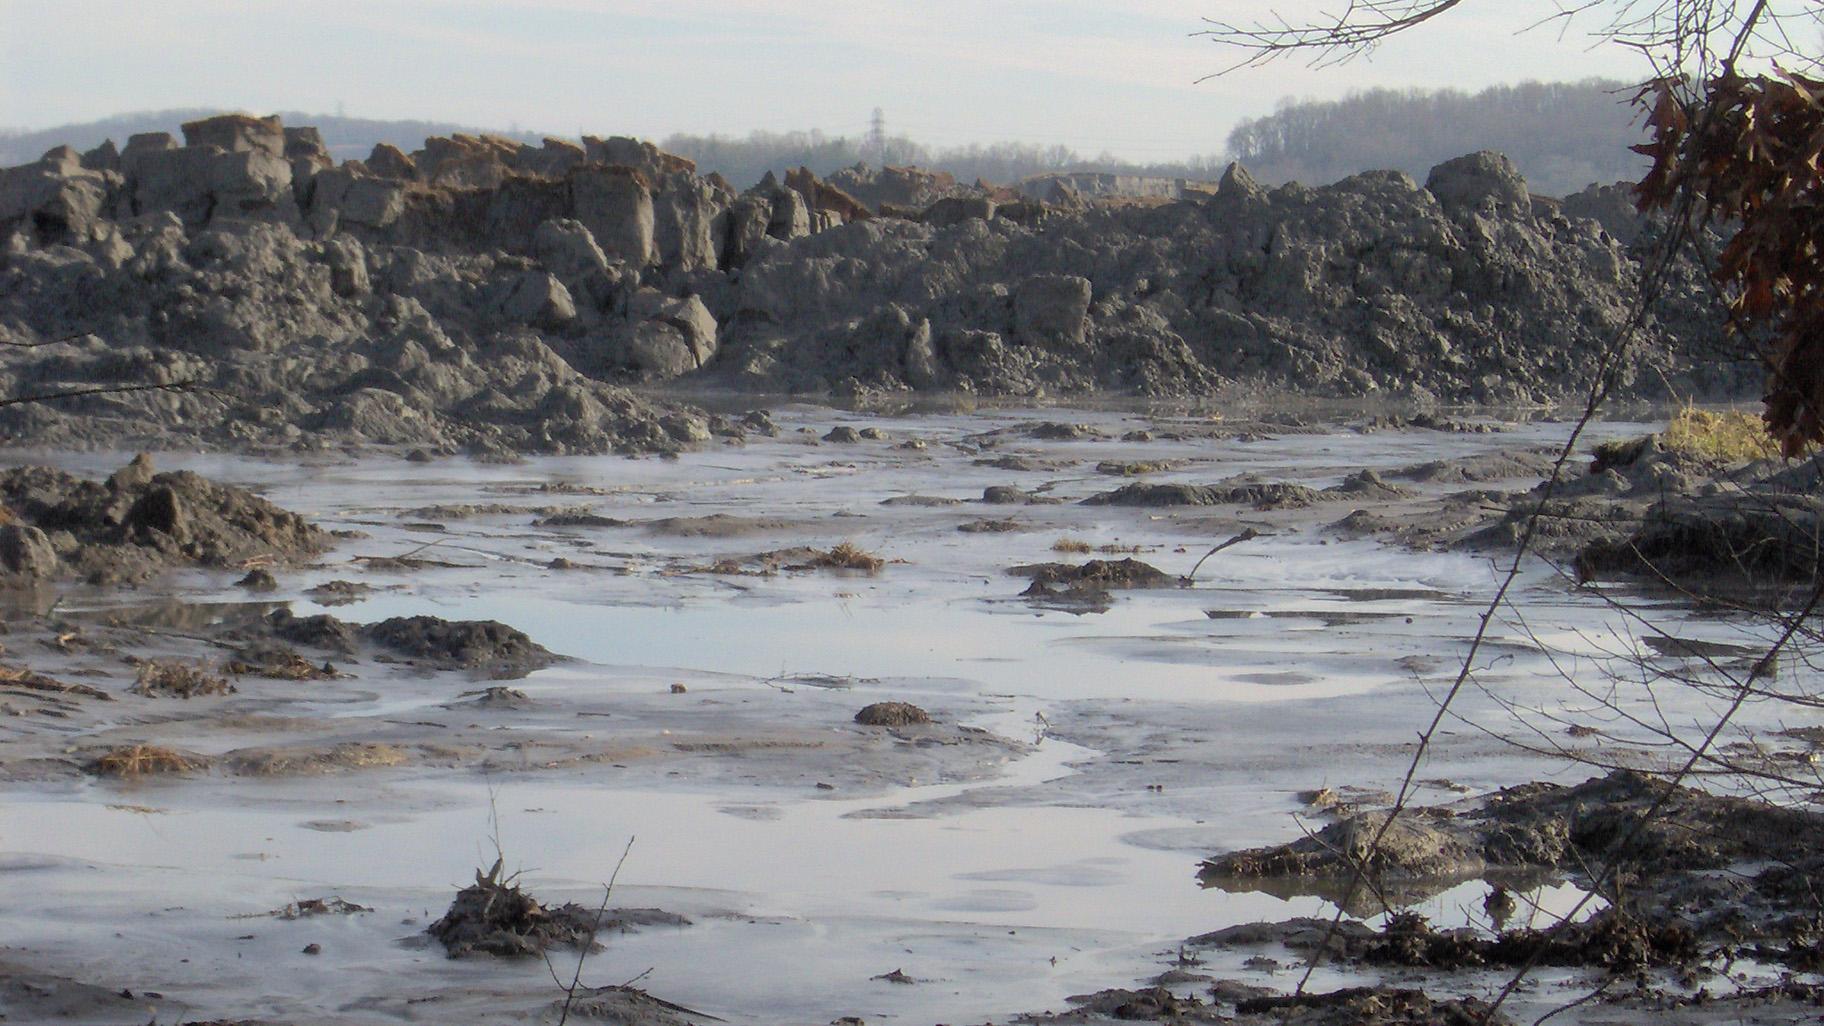 Piles of coal ash after a 2008 spill at the Kingston Fossil Plant in Tennessee. (Brian Stansberry / Wikimedia Commons)